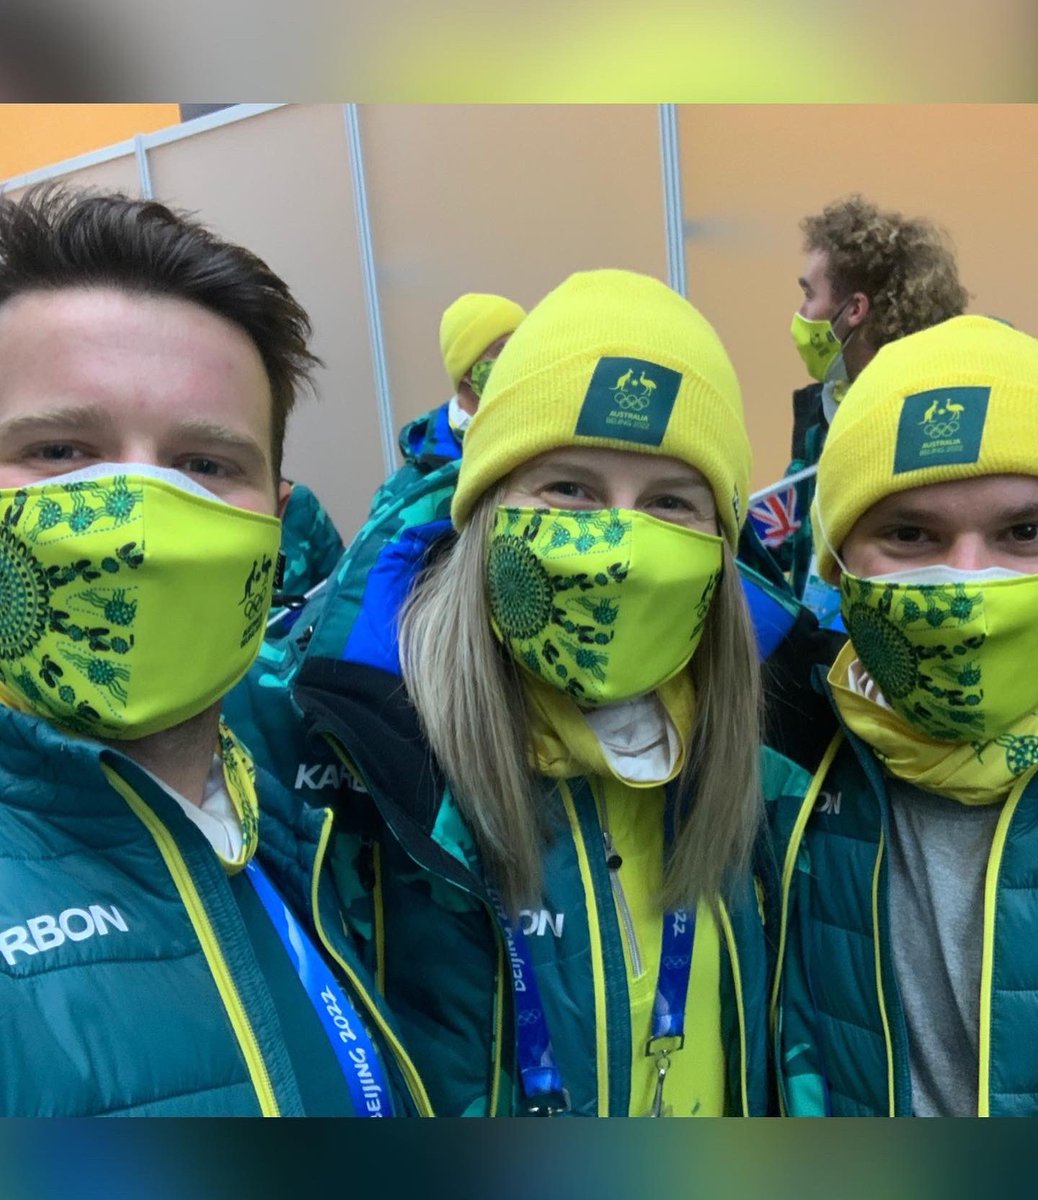 The Olympics have officially begun! 

Such a great feeling walking out into the stadium underneath the Olympic Rings as an athlete, let’s get this show on the road!
.
T- 2 days till our first training day.
.
#chasingwinter #beijing2022 #teamaus #olympics #winter #sbx